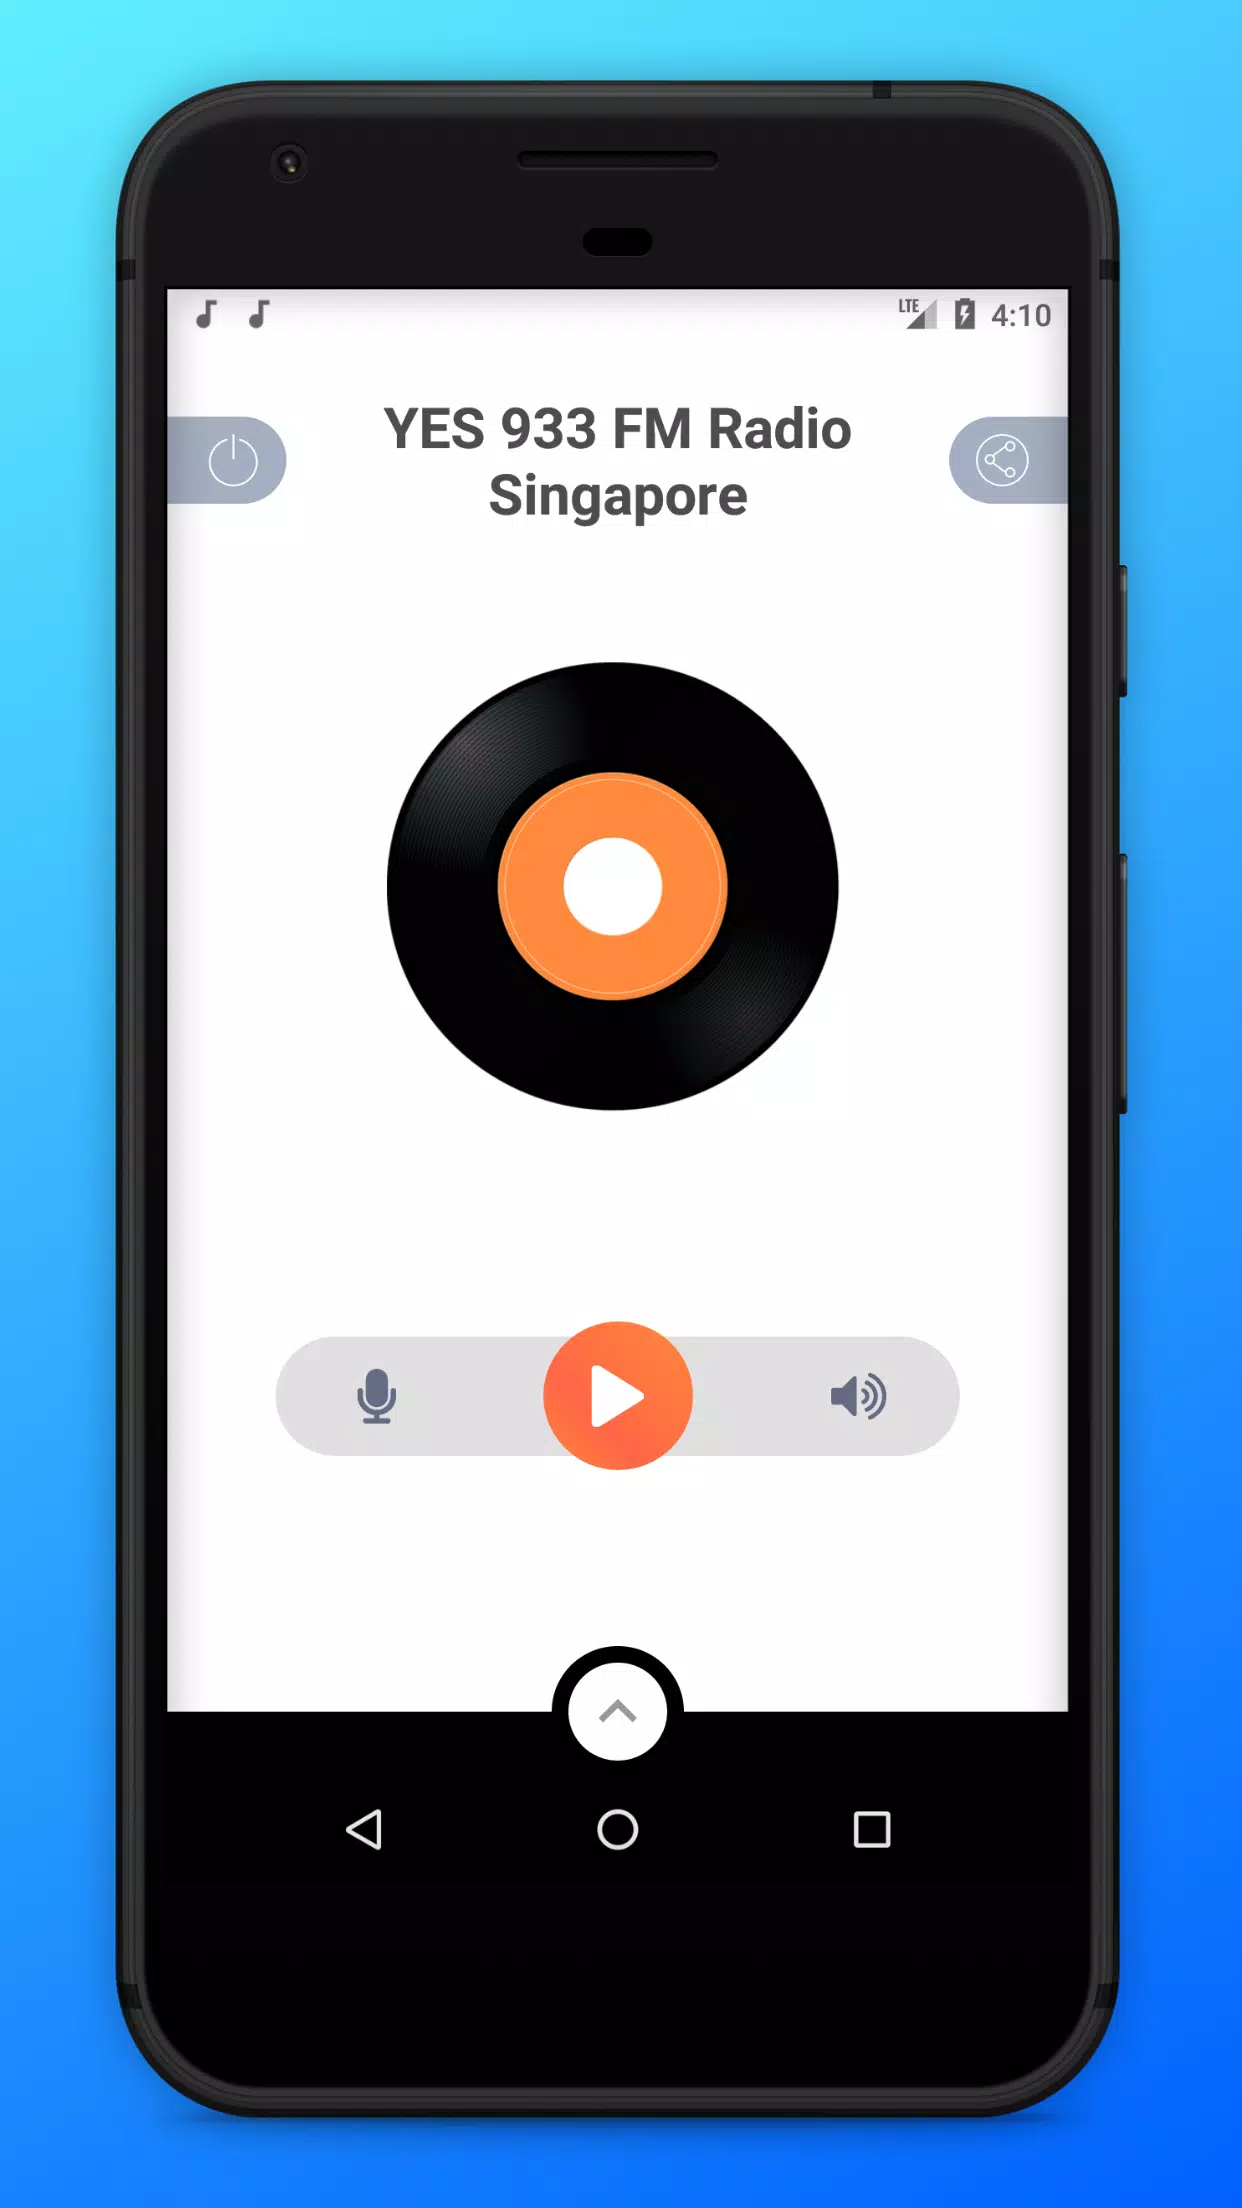 Radio YES 933 FM Live + App Singapore 24h Online for Android - APK Download